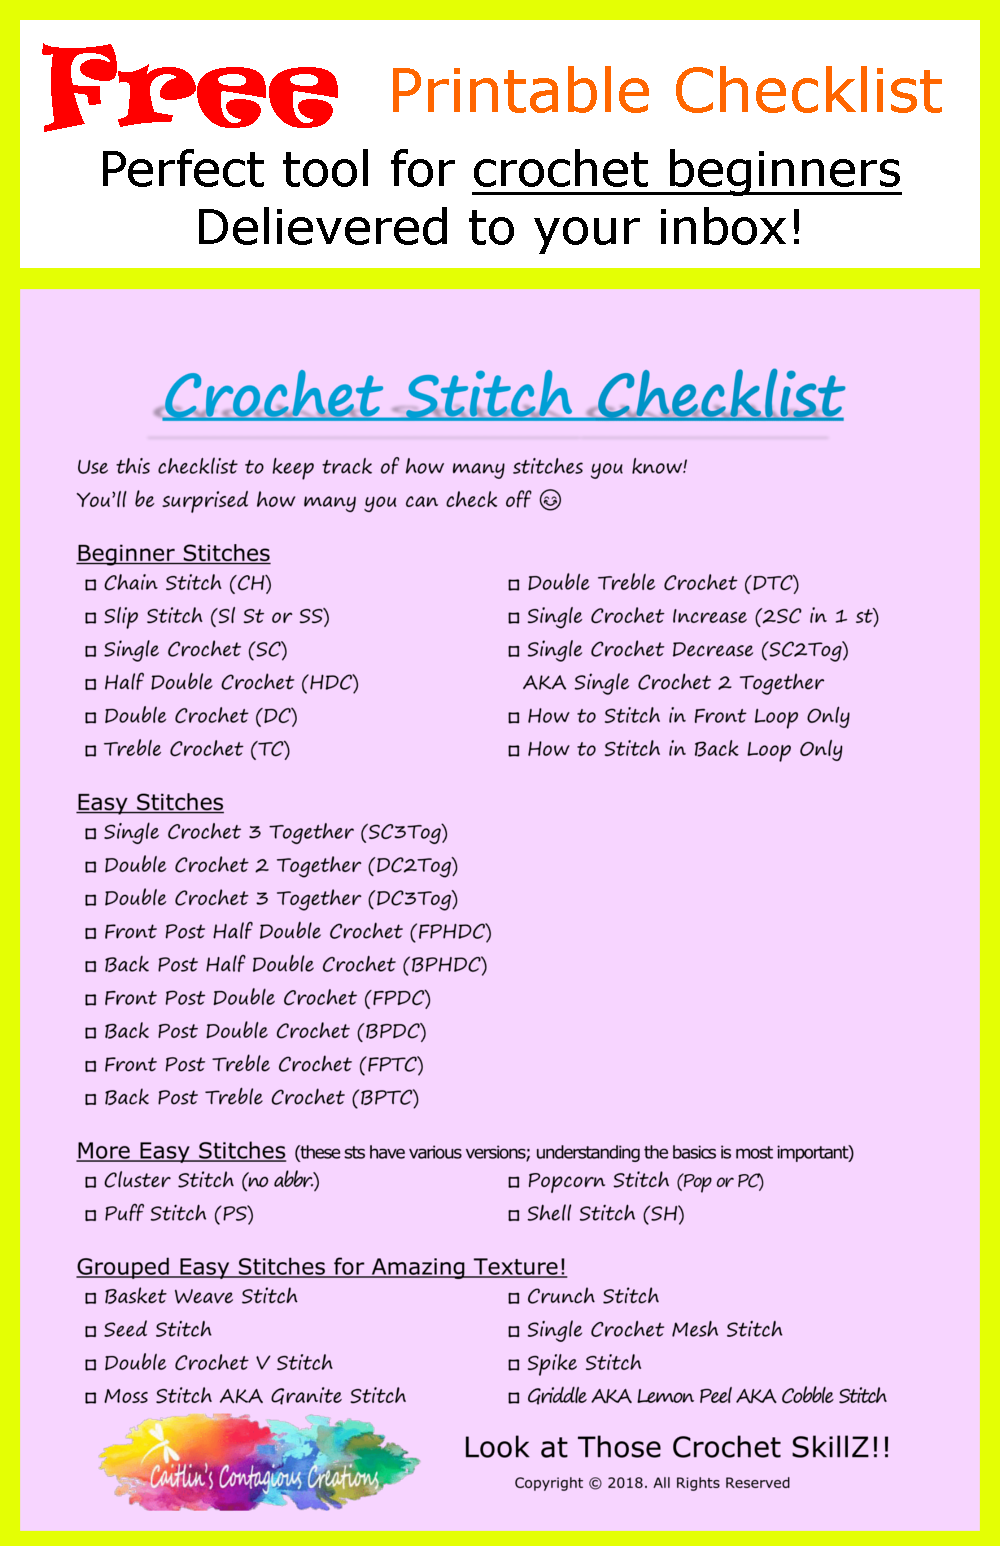 This crochet stitch checklist is a great tool for beginners to boost confidence and keep track of how many stitches you know. Get your copy of this free printable PDF checklist handout, helpful for crochet beginners and advanced alike!